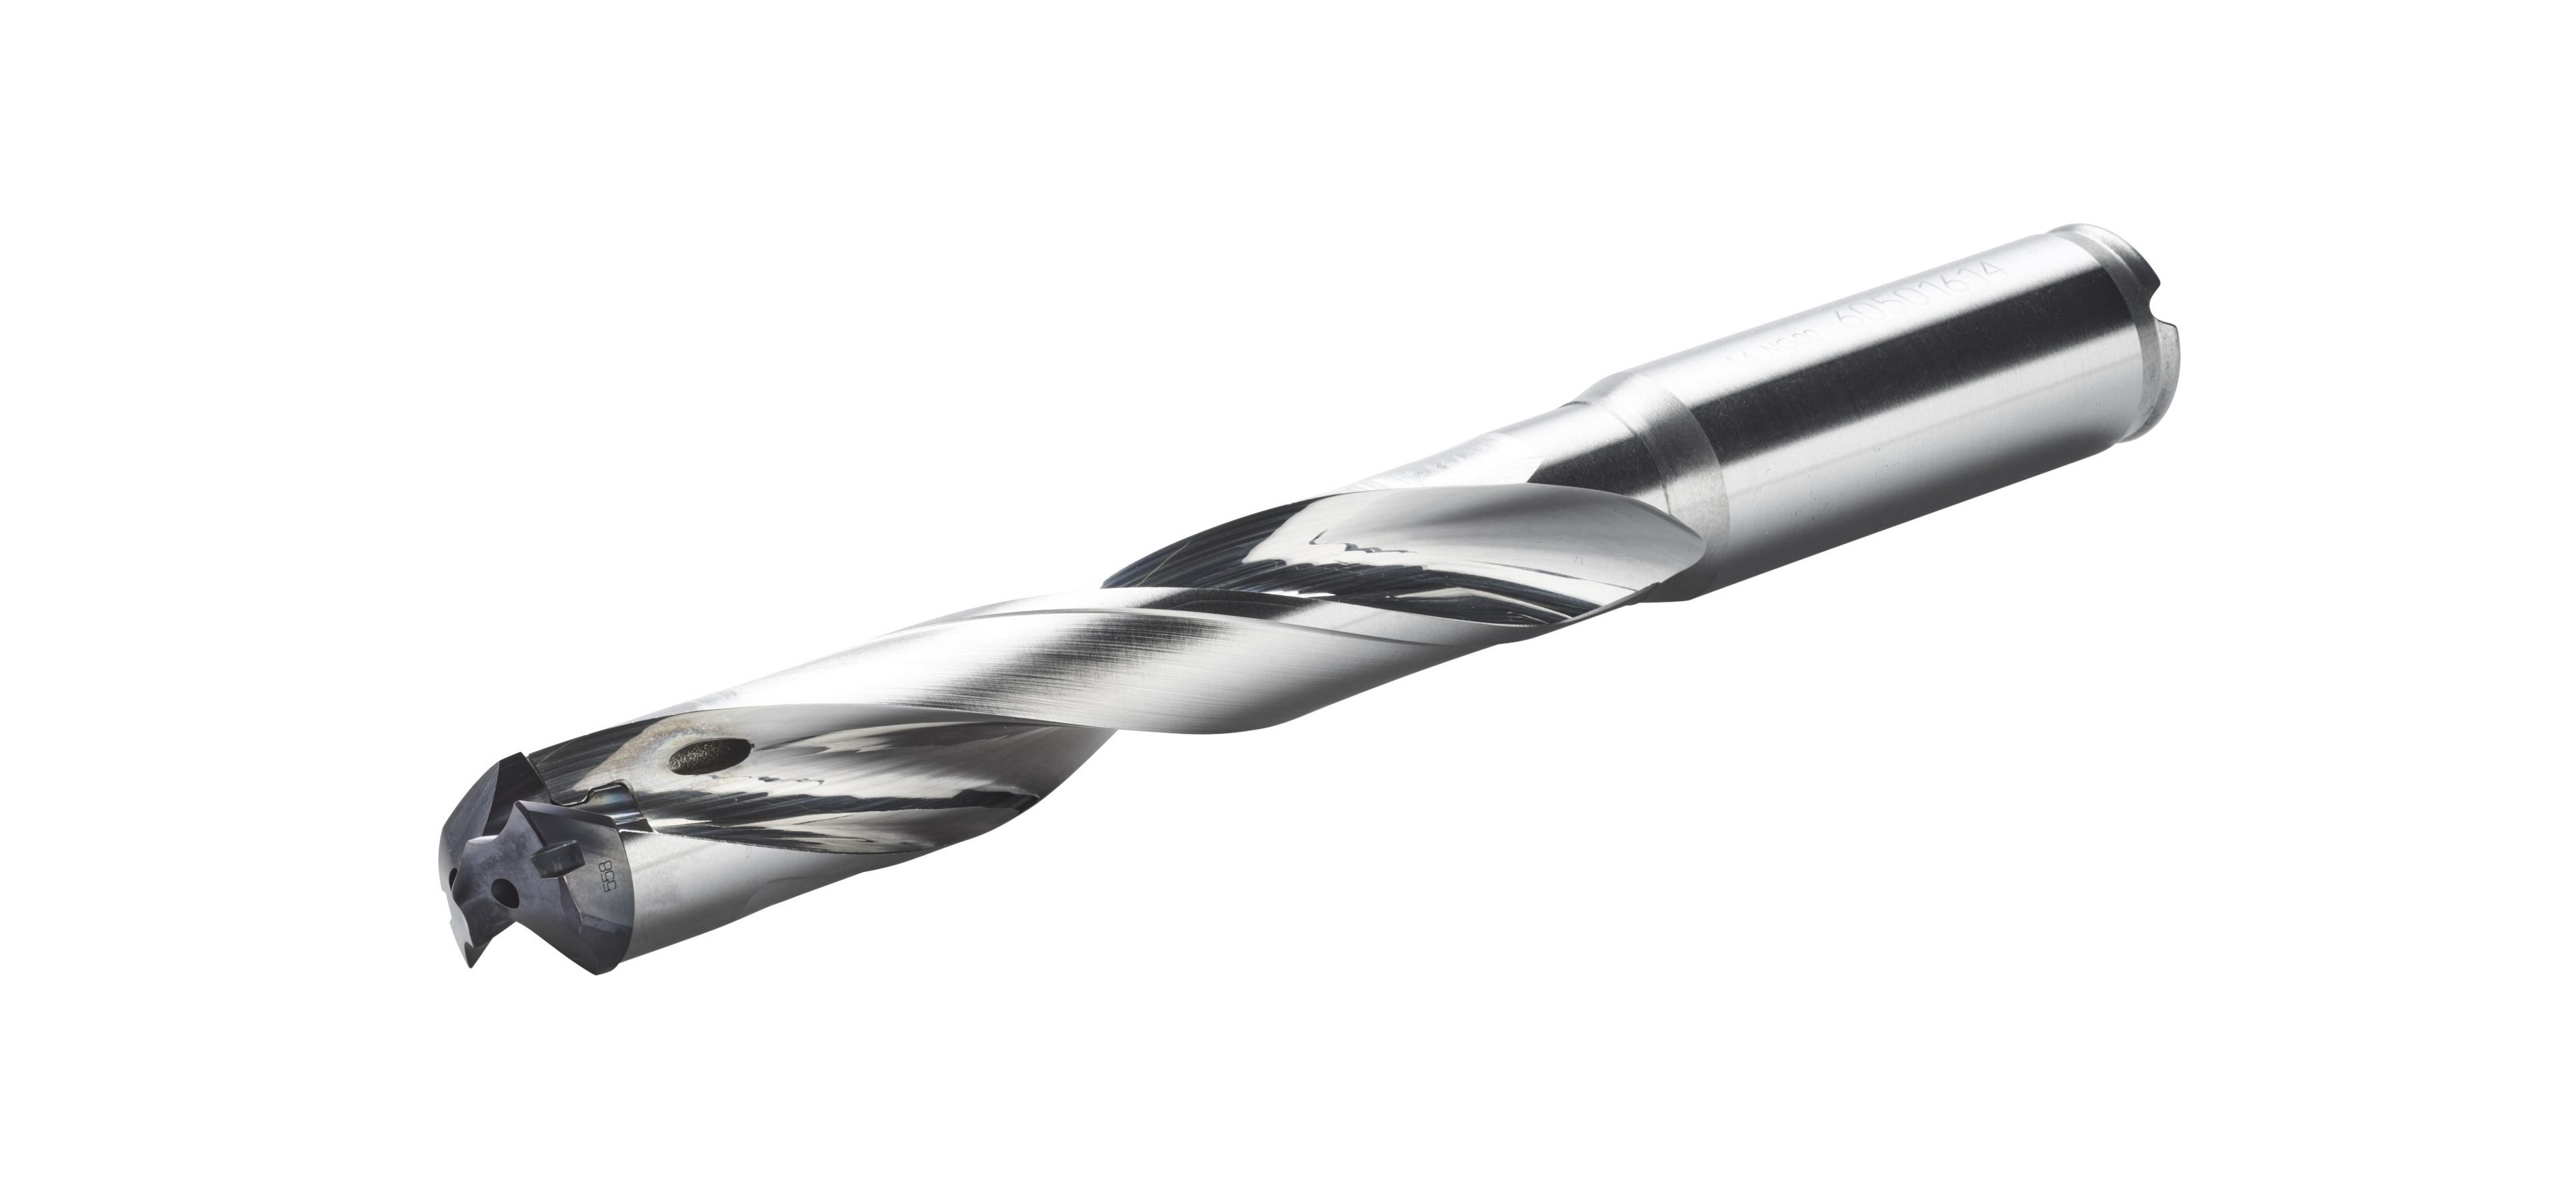 The FS in Kennametal’s KenTIP FS system stands for “full solid” front. The modular drill line offers a range of tip geometries and covers hole sizes from 6 to 26 millimeters in steel, stainless steel and cast iron. (Image courtesy of Kennametal)